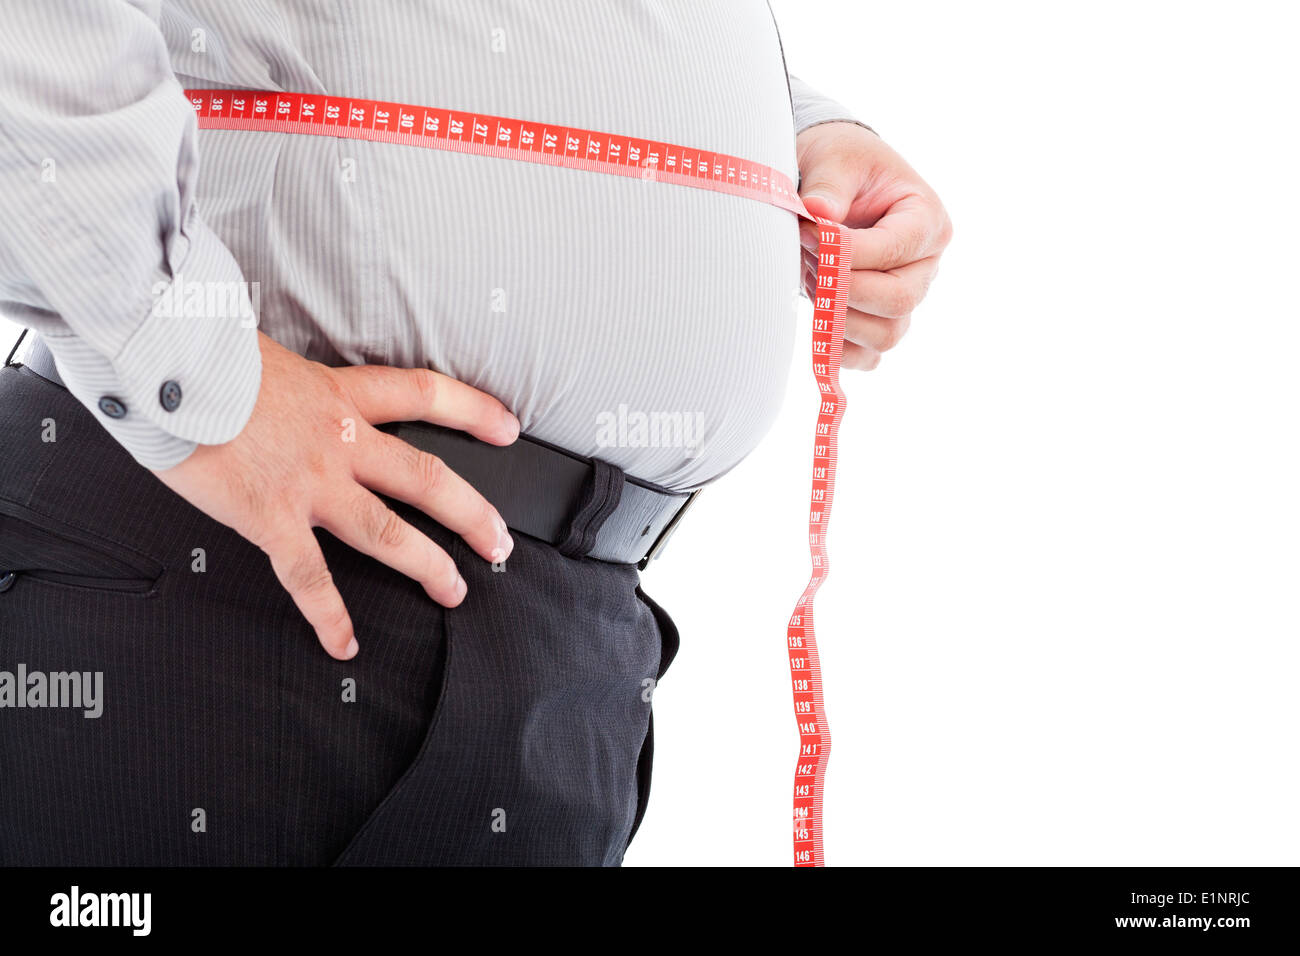 fat business man use scale to measure his waistline Stock Photo